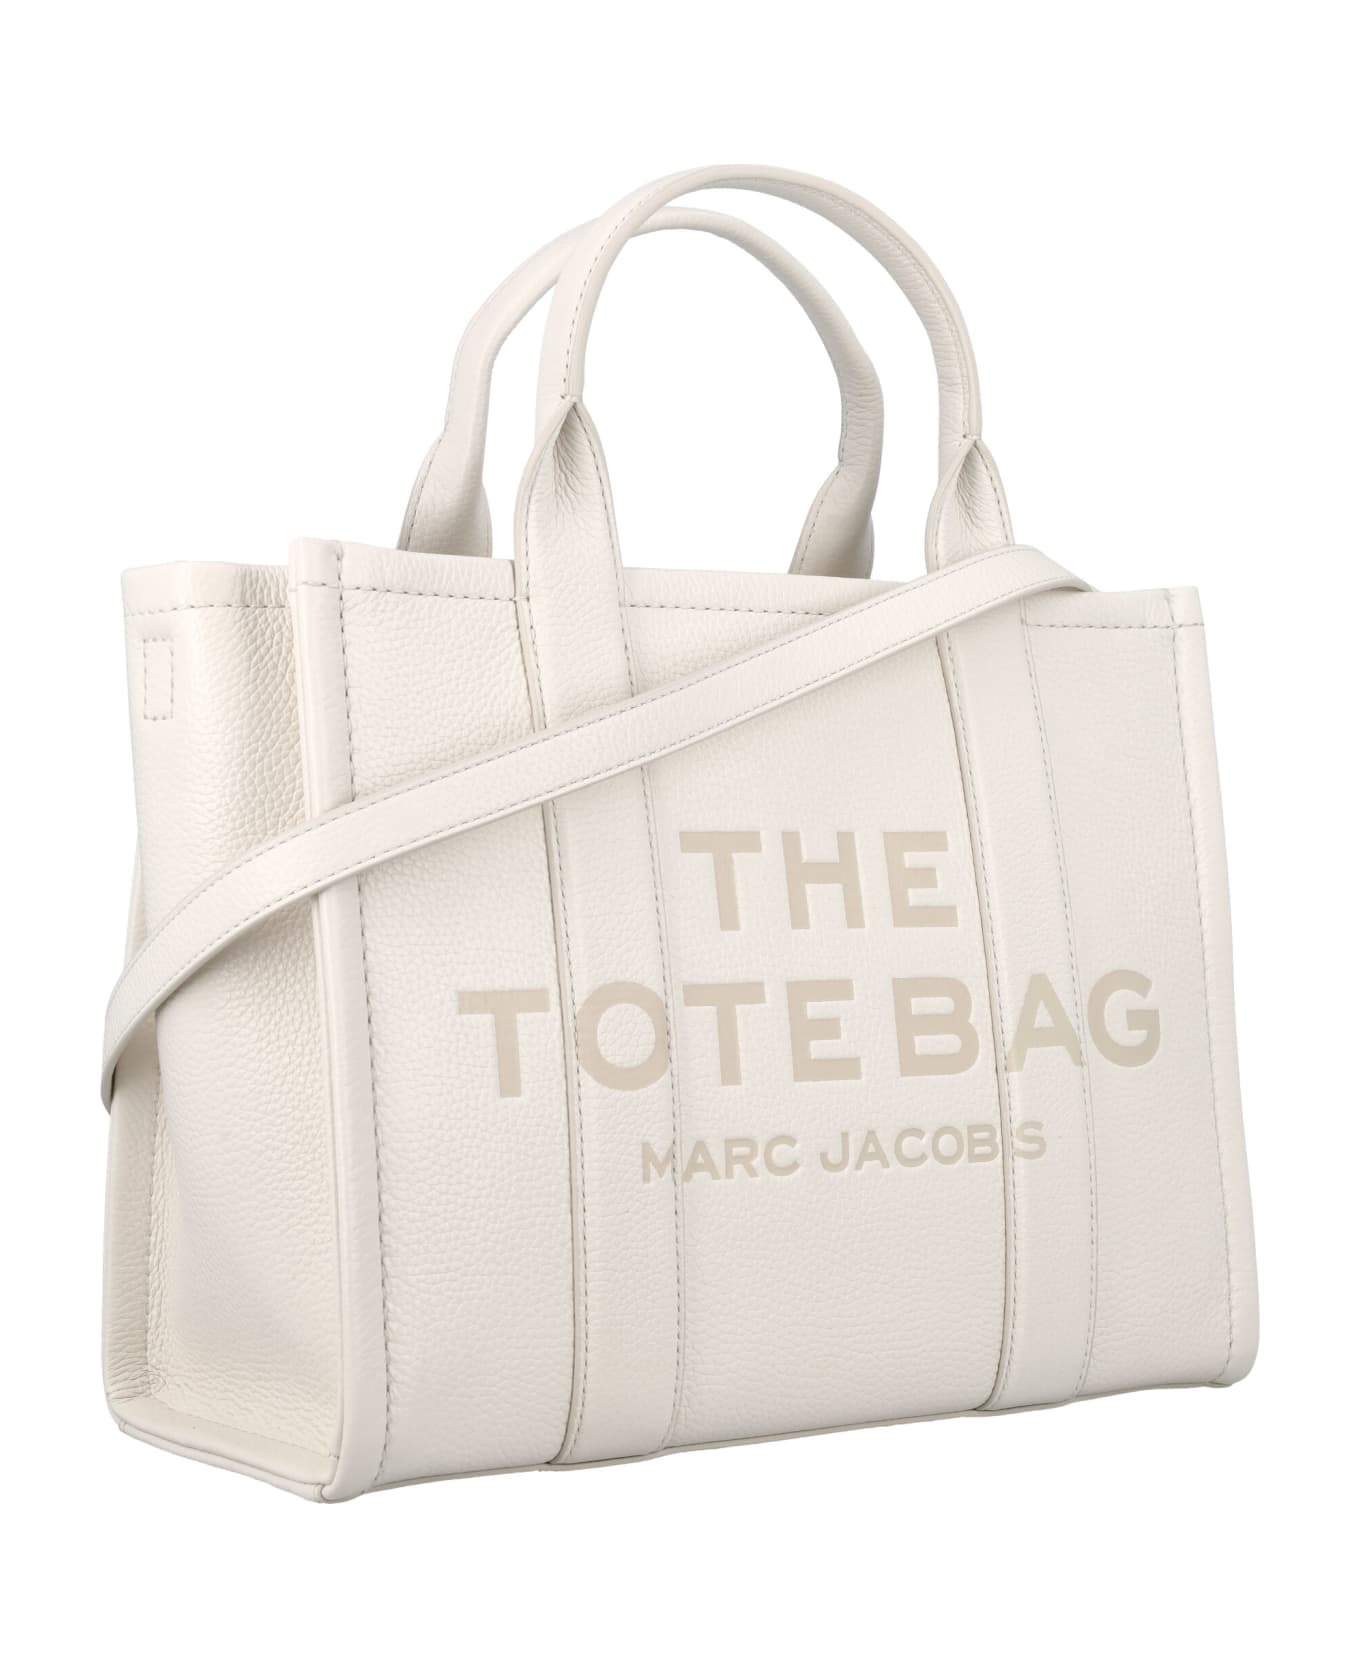 Marc Jacobs The Leather Medium Tote Bag - COTTON SILVER